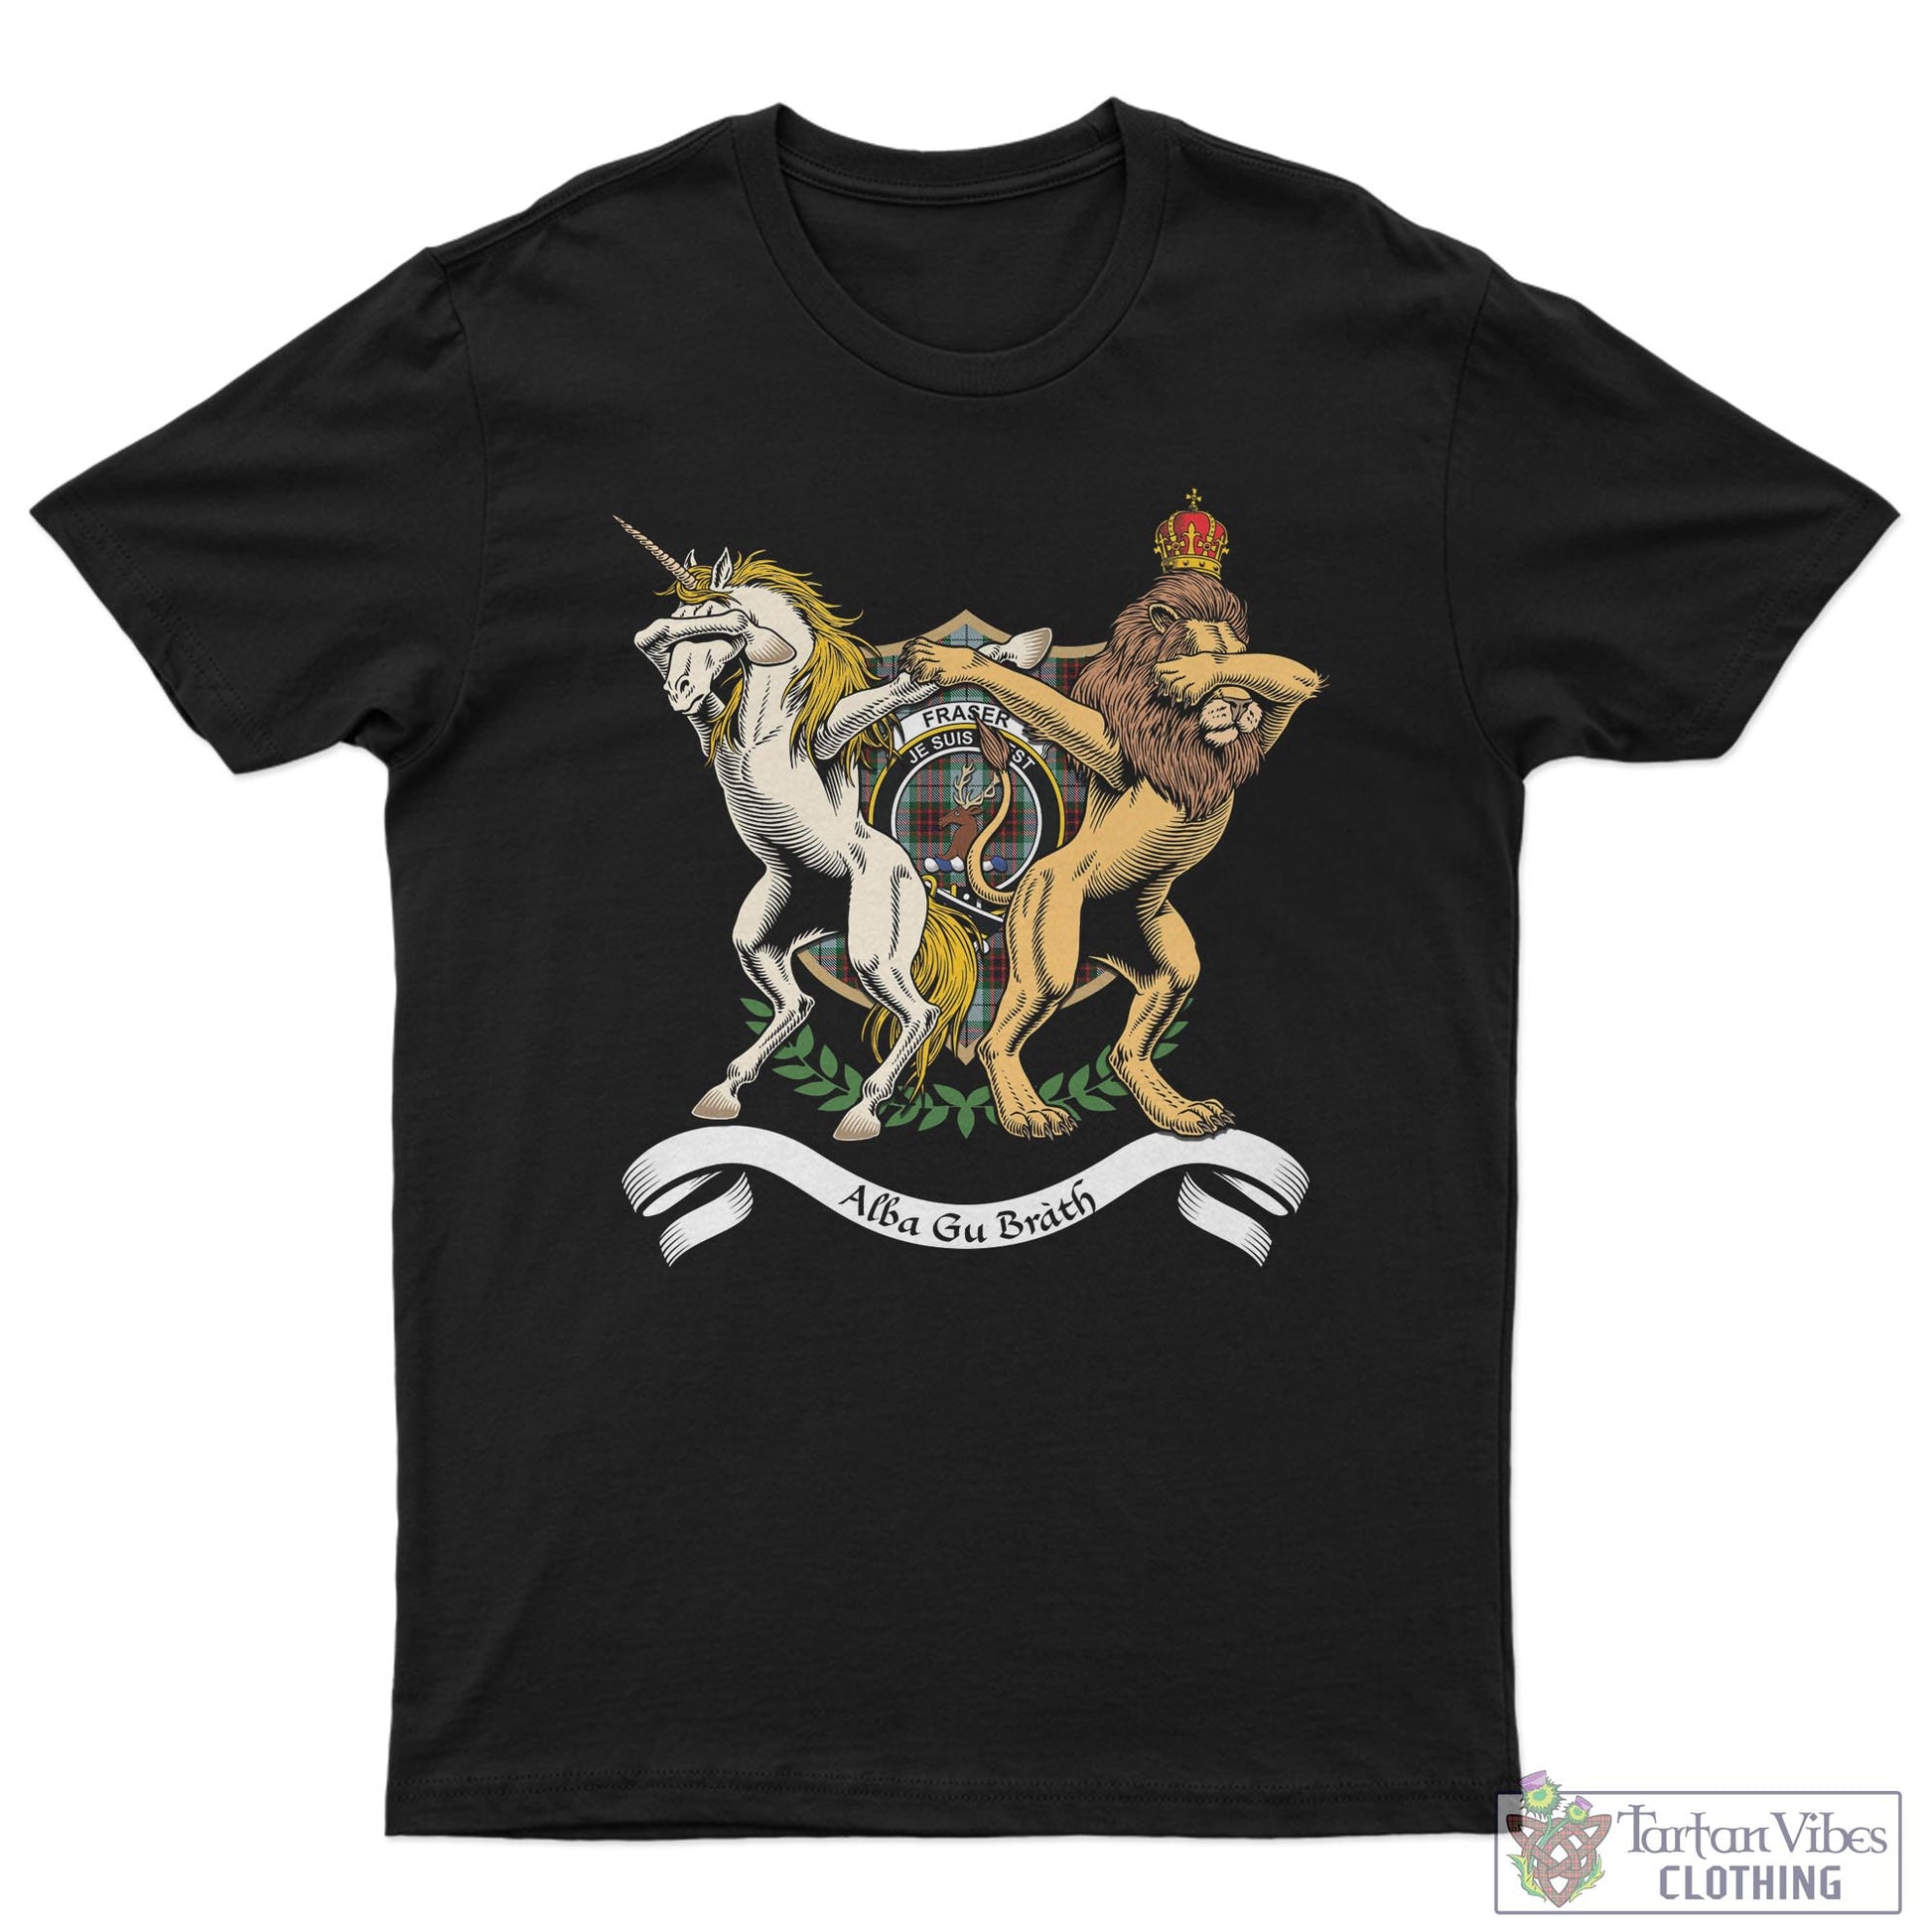 Tartan Vibes Clothing Fraser Dress Family Crest Cotton Men's T-Shirt with Scotland Royal Coat Of Arm Funny Style